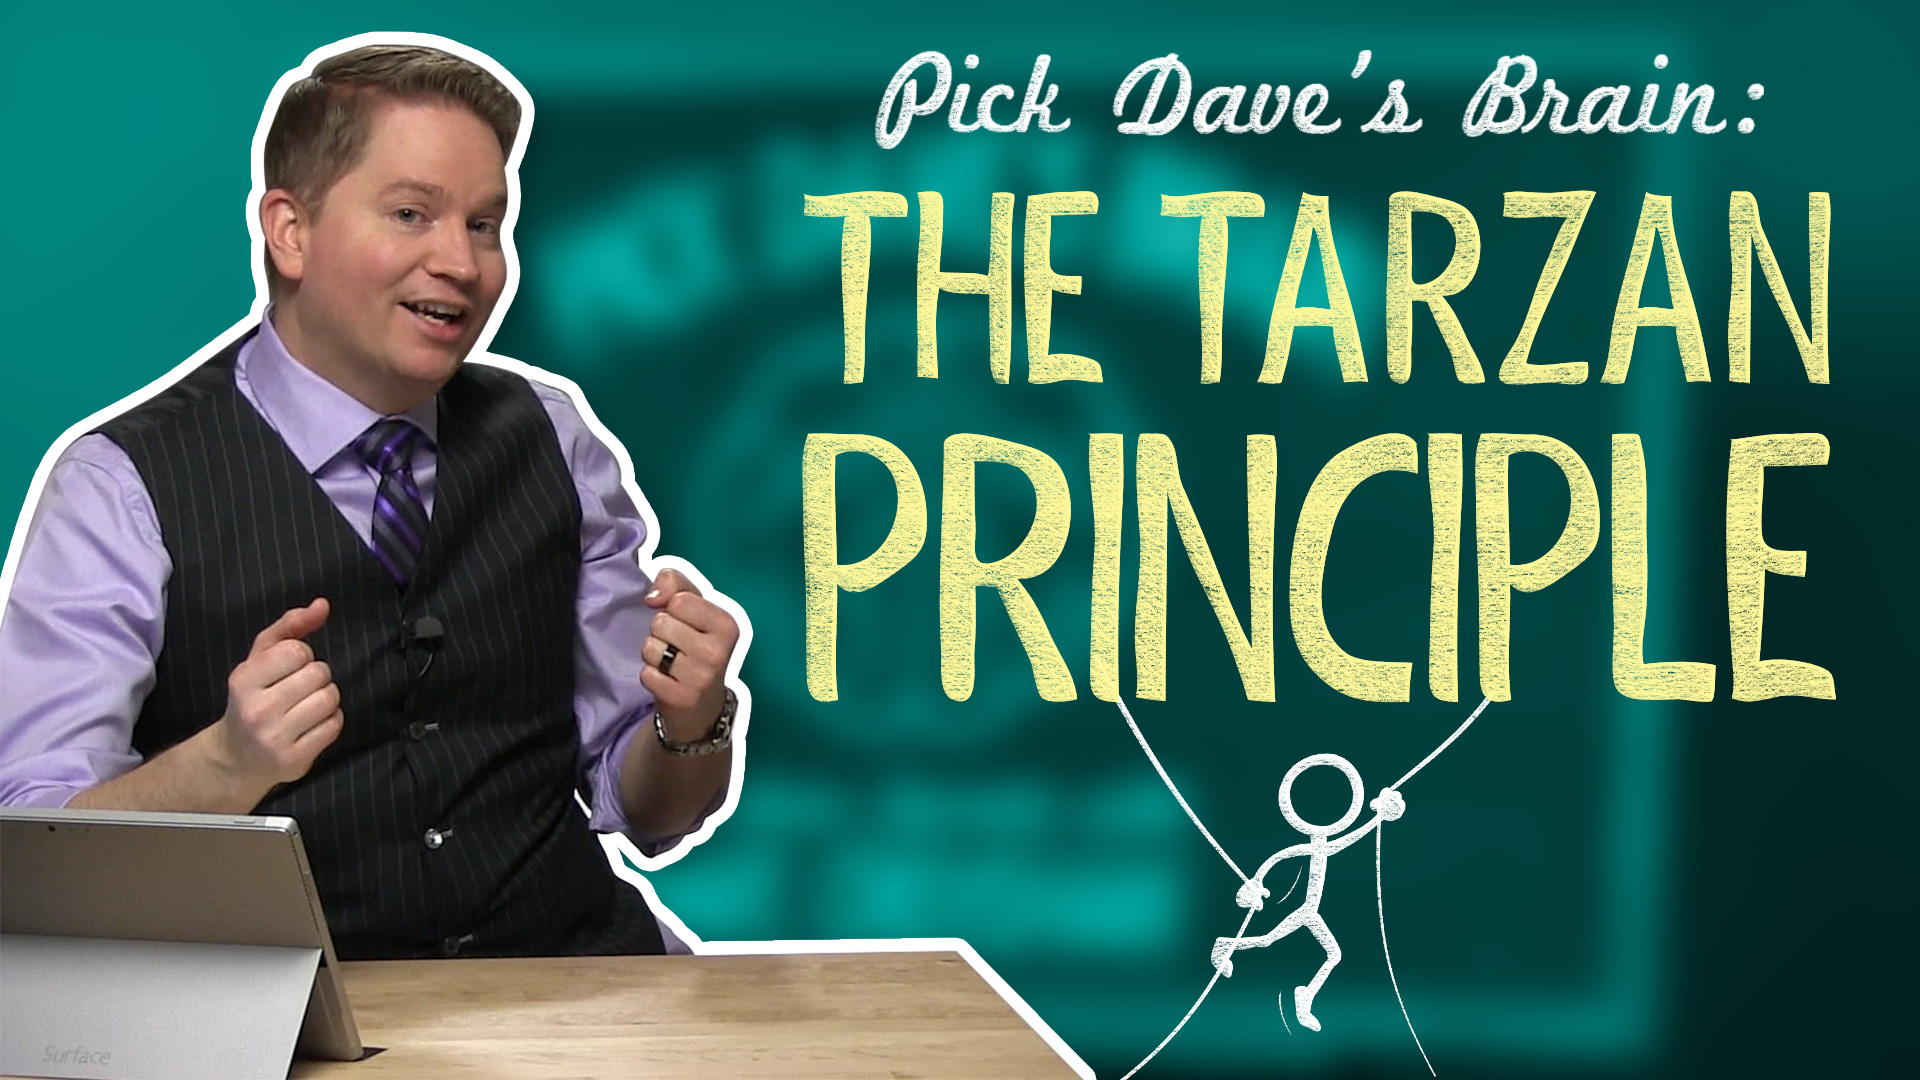 To Freelance or Not to Freelance? – Pick Dave’s Brain